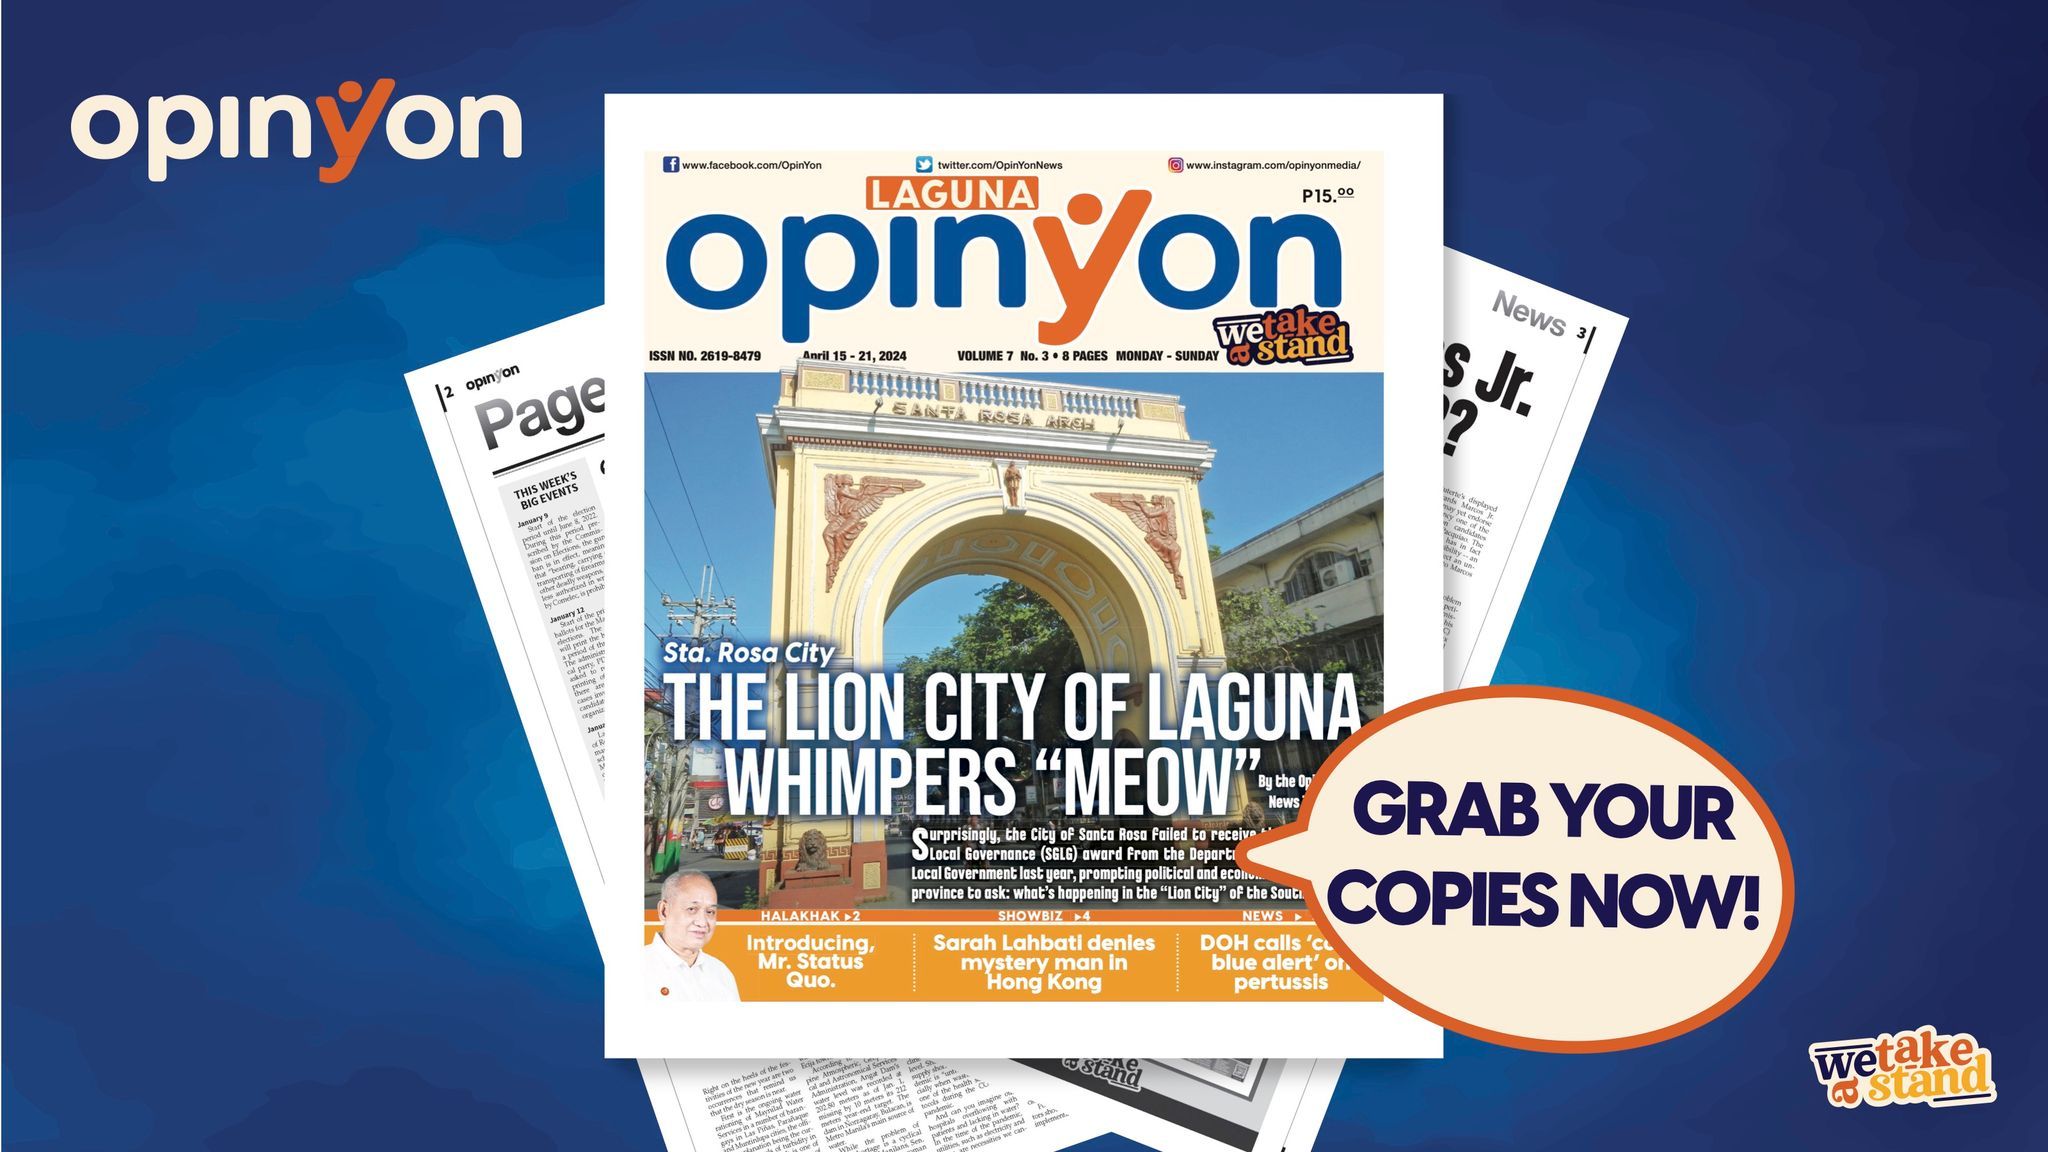 The Lion City of Laguna whimpers “meow”